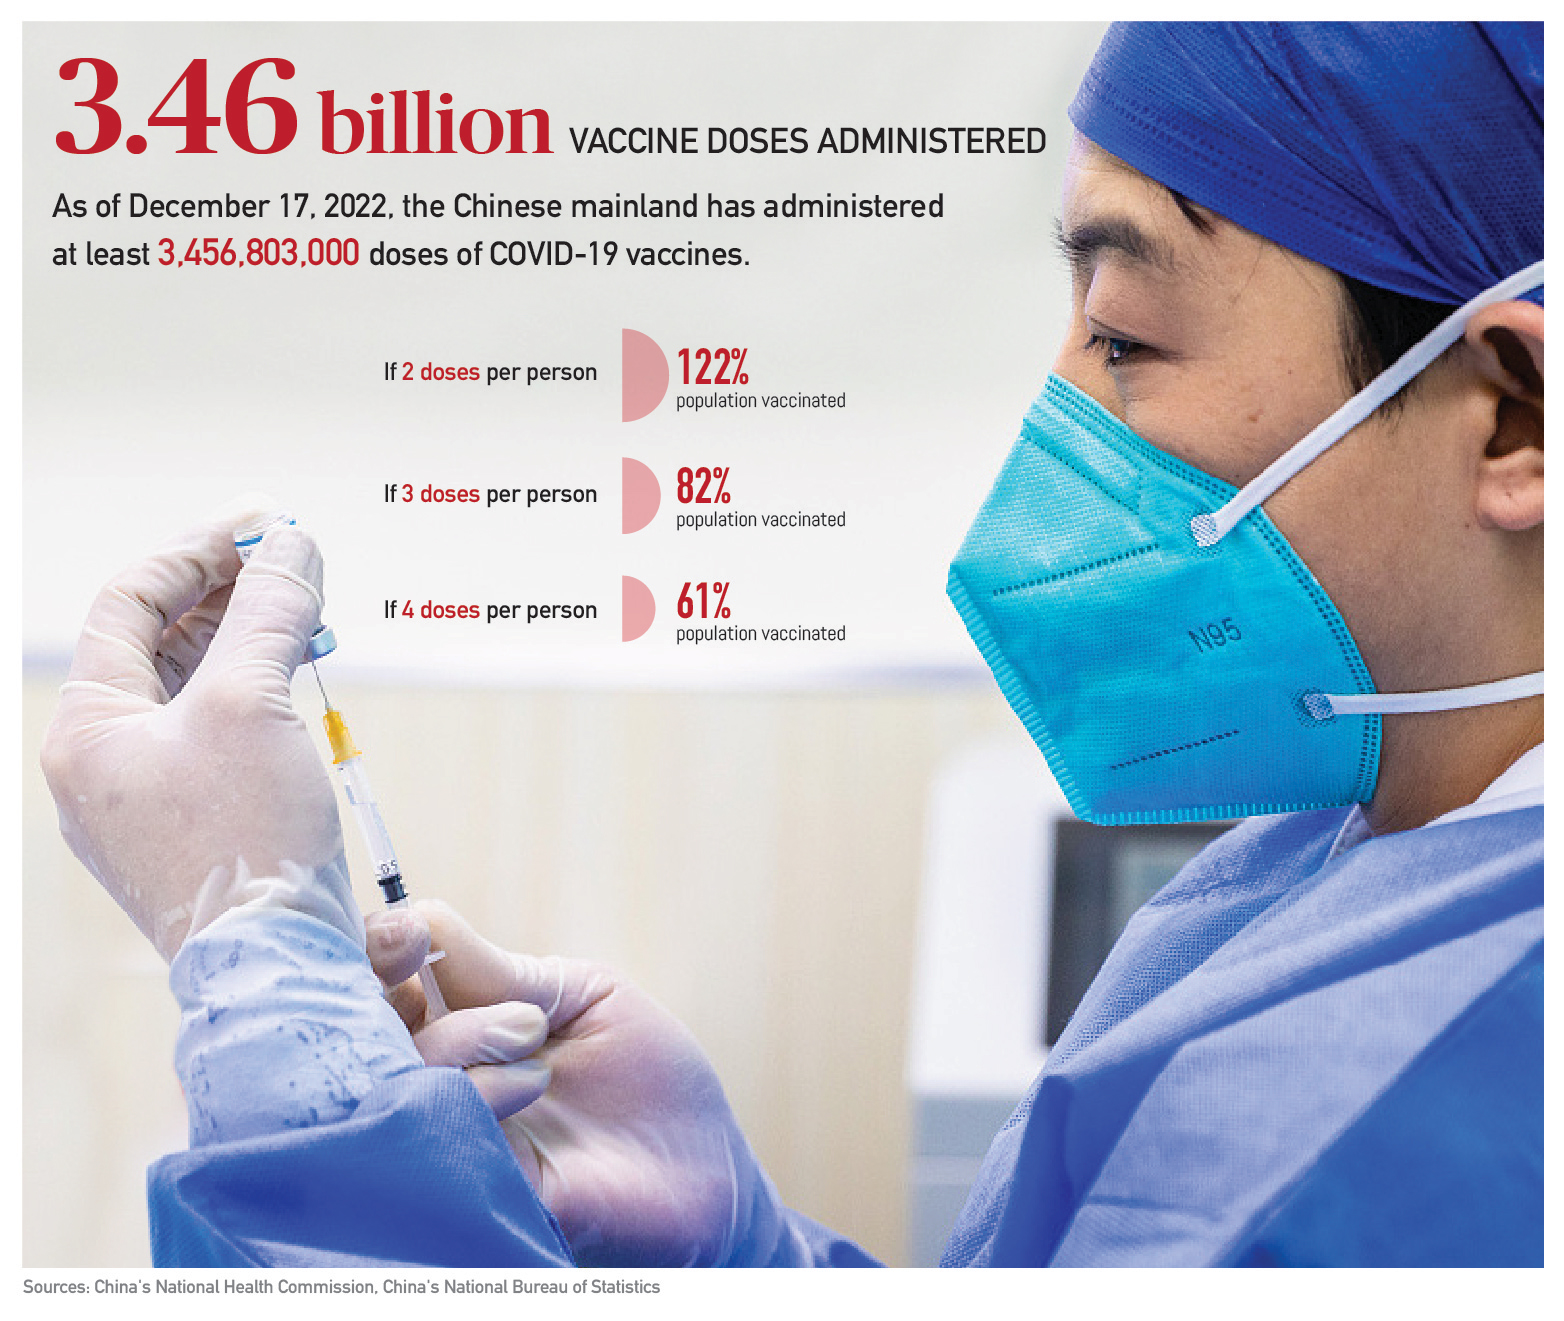 China's COVID-19 fight in numbers: 3.46 billion vaccine doses administered